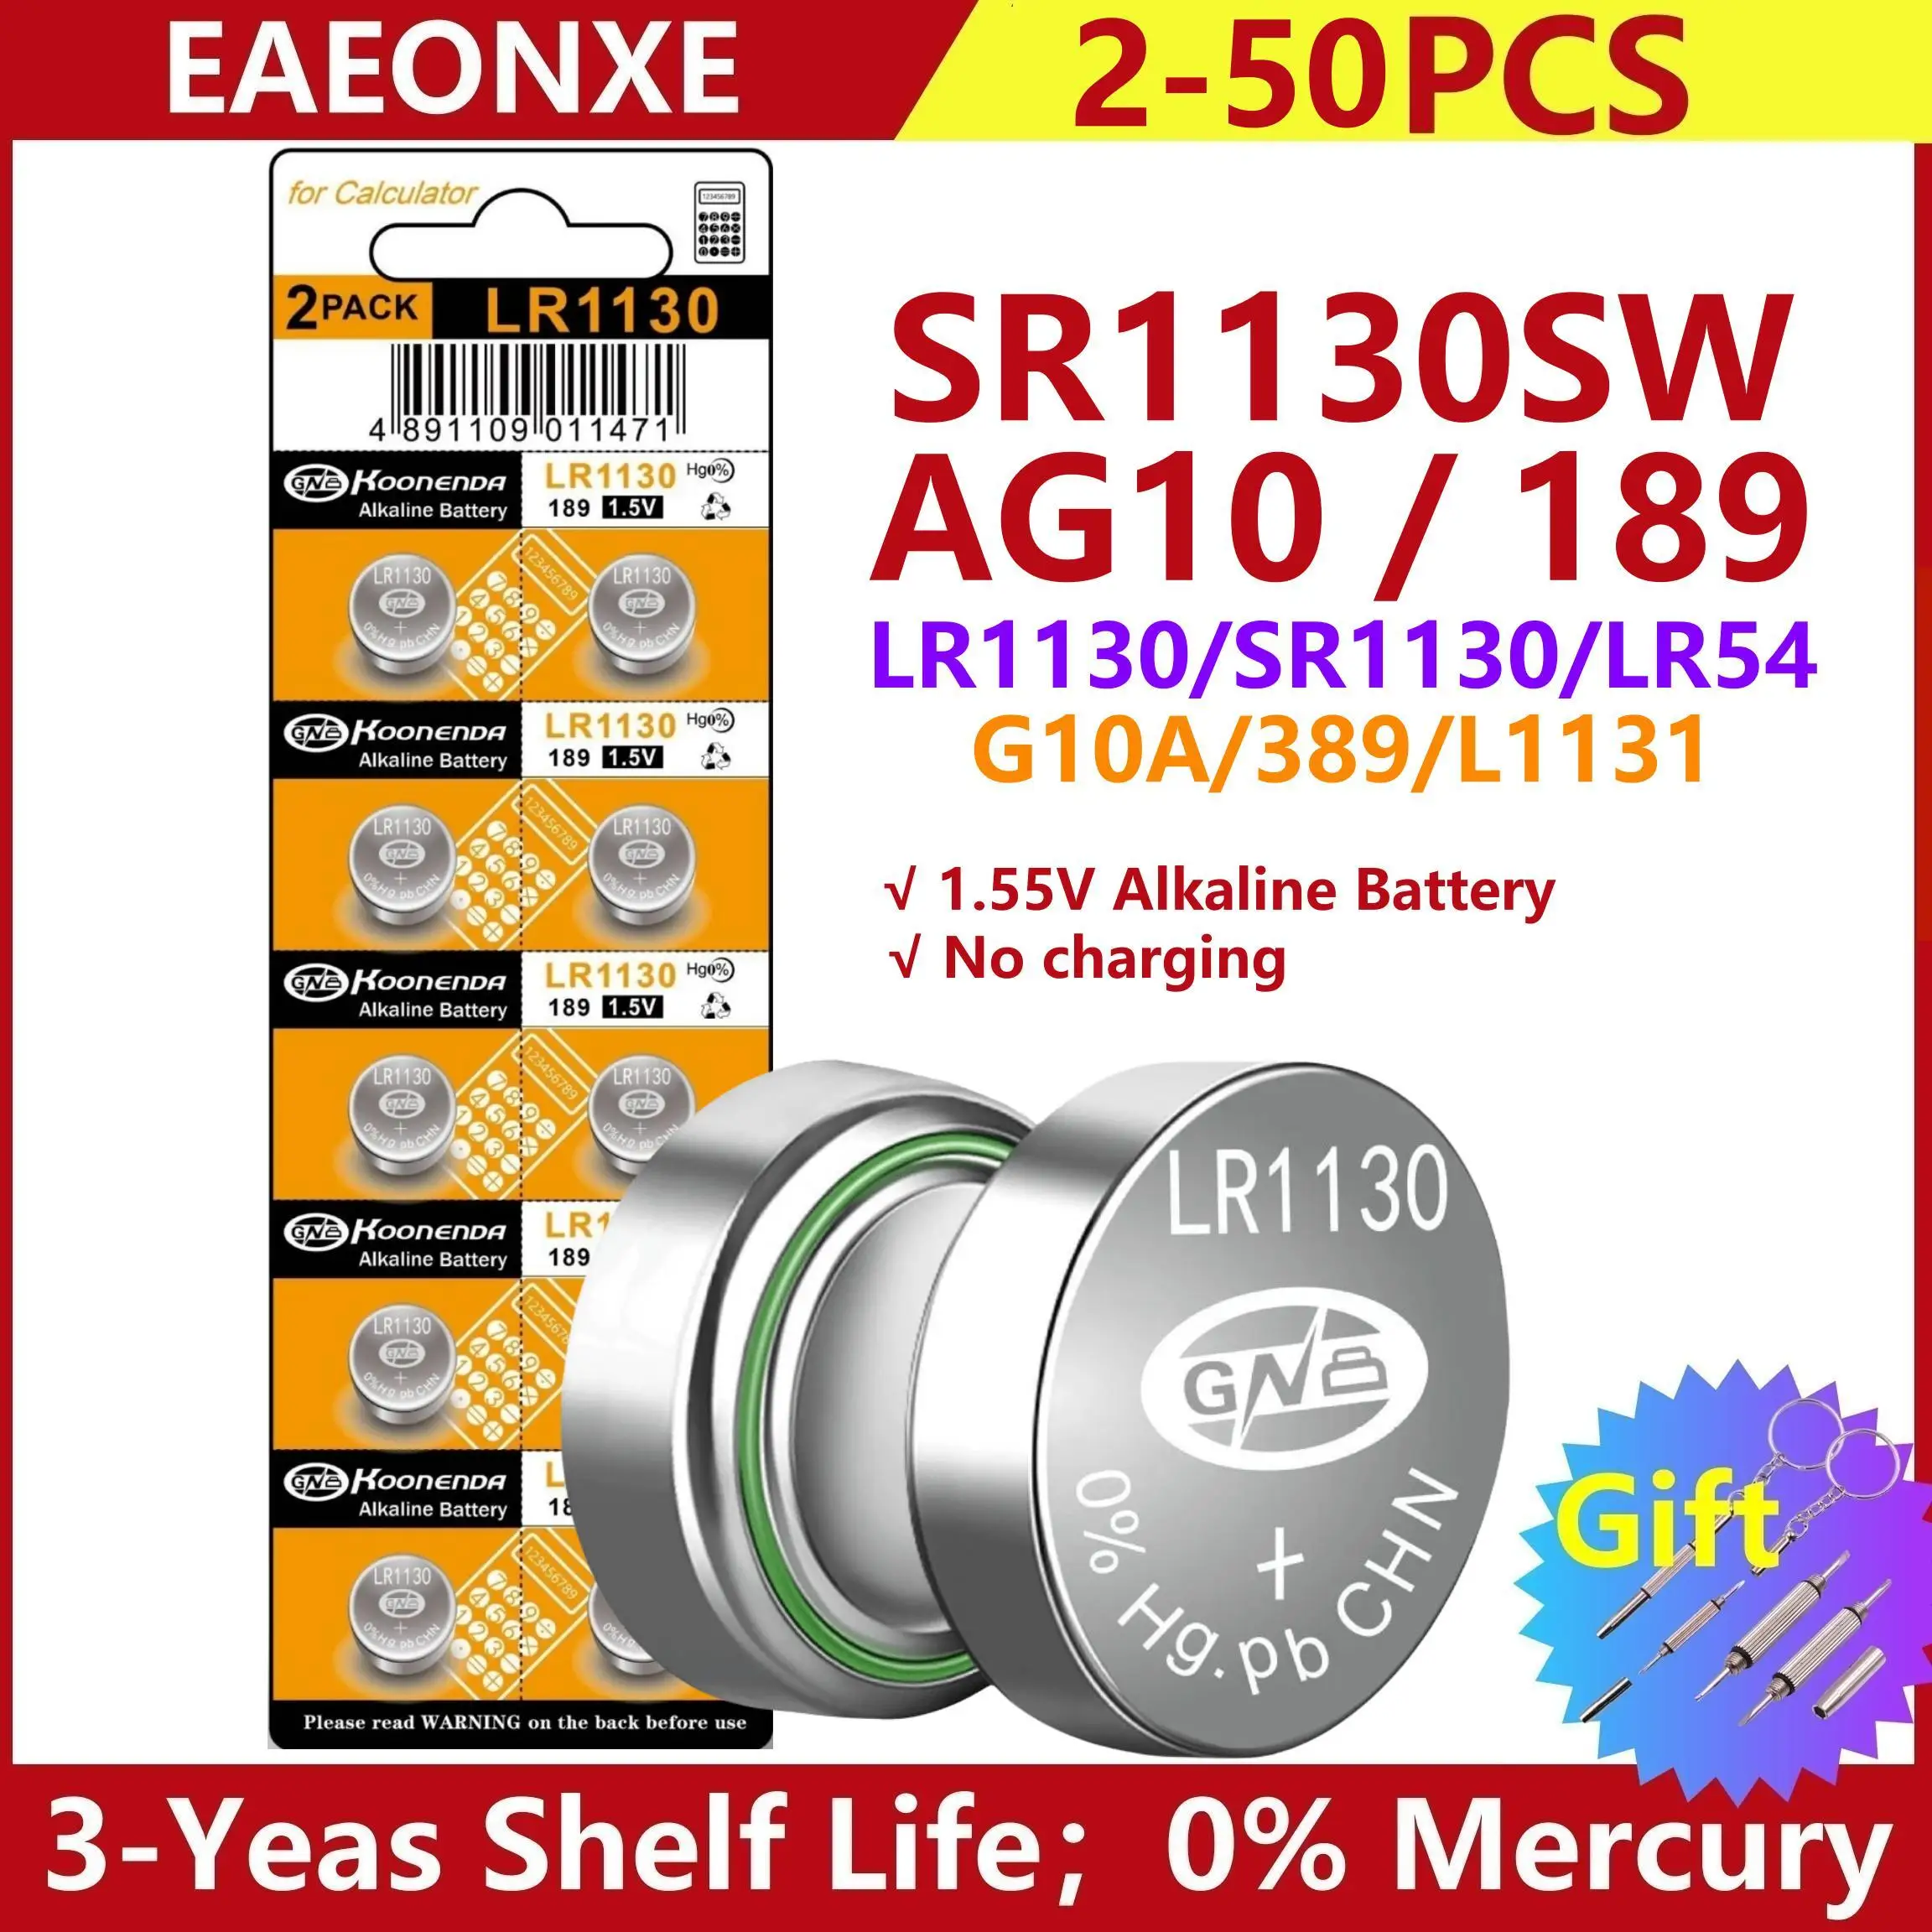 LR1130 AG10 85mAh SR1130 189 Button Pilas Batteries 389 LR54 L1131 389A 1.5V Alkaline Coin Cell For Clock Watch Battery 25pcs cr1632 1632 dl1632 br1632 kcr1632 lm1632 3v lithium batteries cell button coin battery for calculator toy watch clock